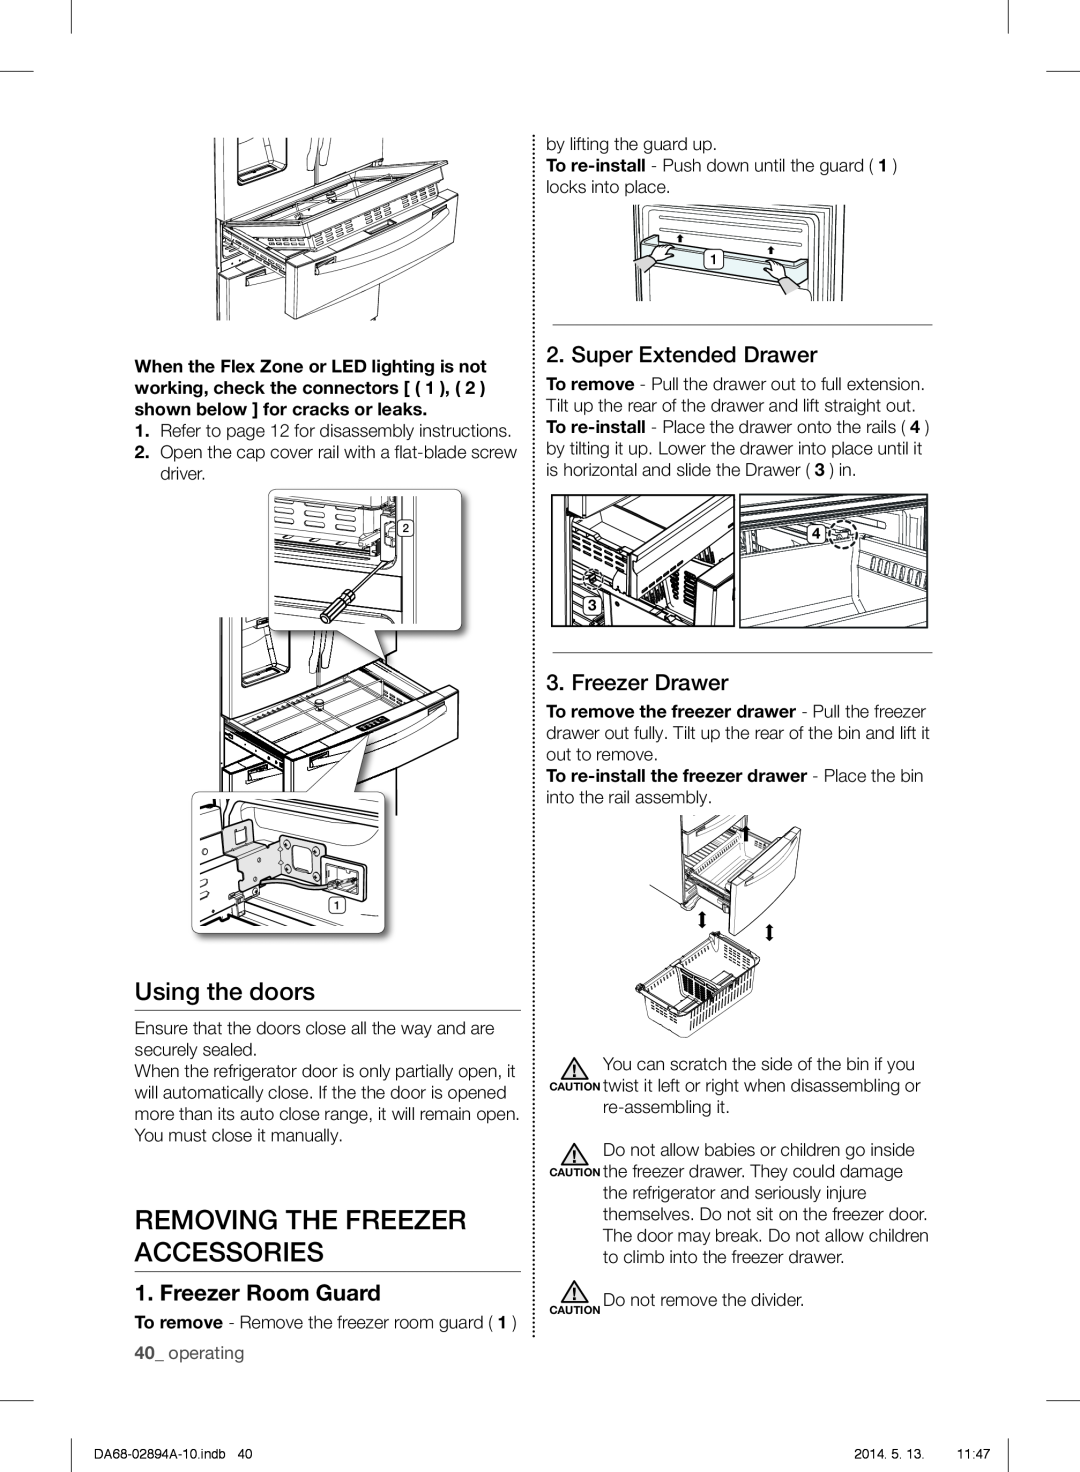 Samsung RF31FMESBSR user manual Removing The Freezer Accessories, Using the doors, Super Extended Drawer, Freezer Drawer 